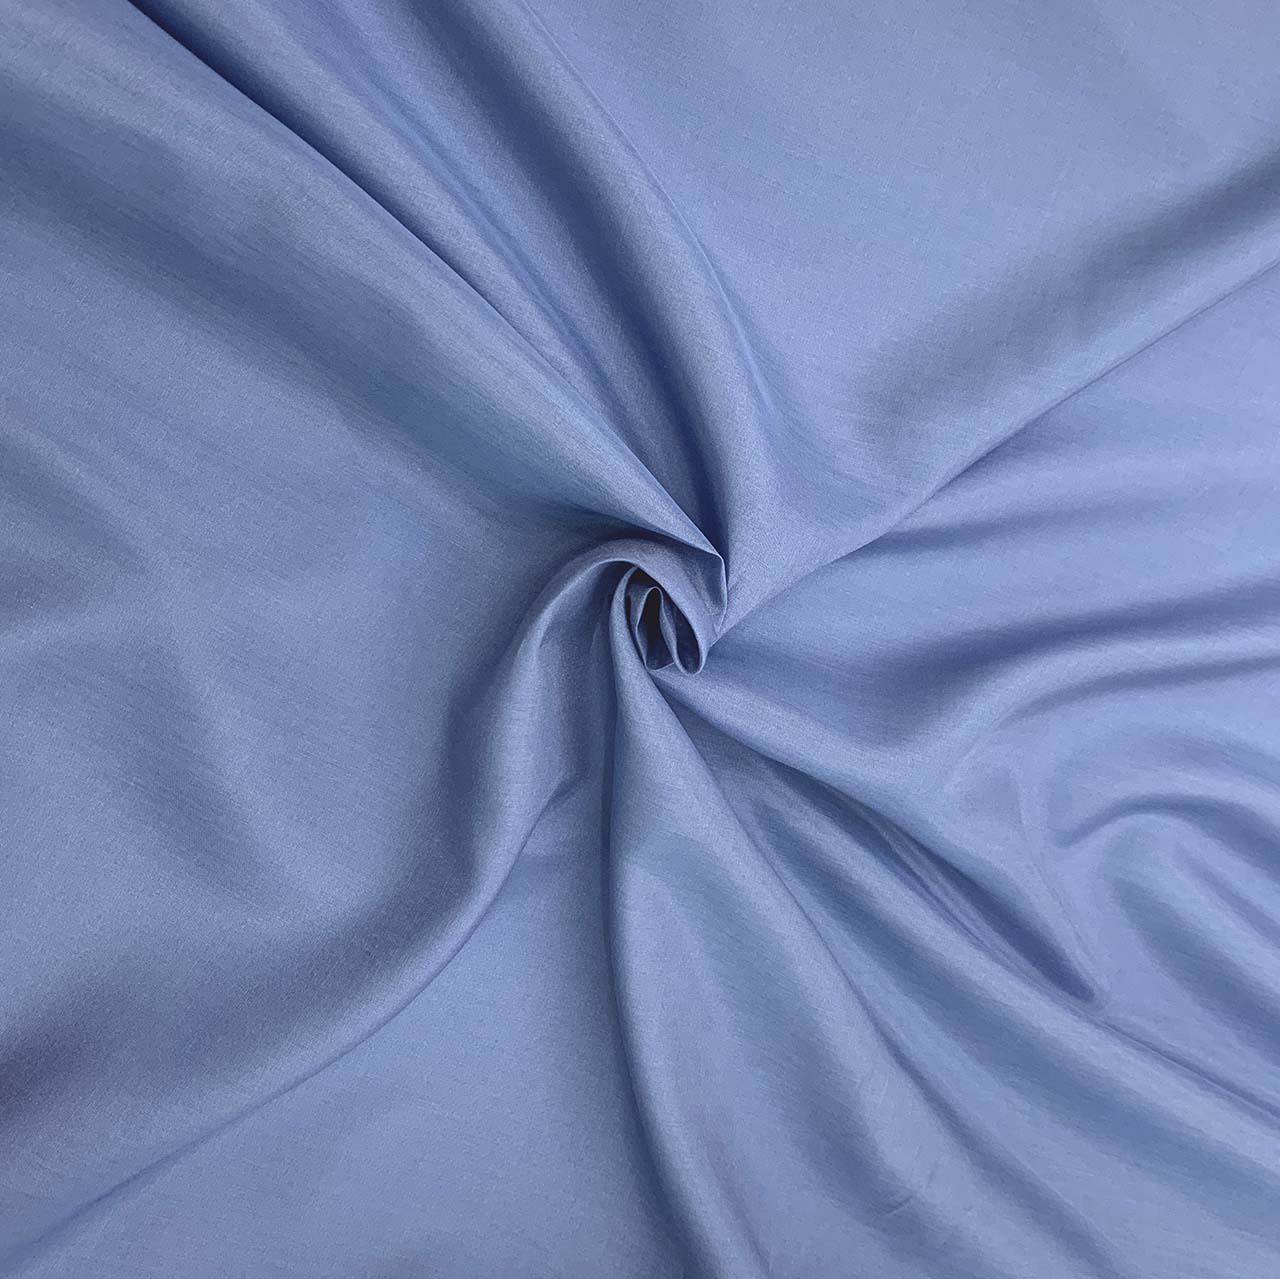 wedgewood silk cotton fabric wedgewood silk cotton voile - Fabric Collection